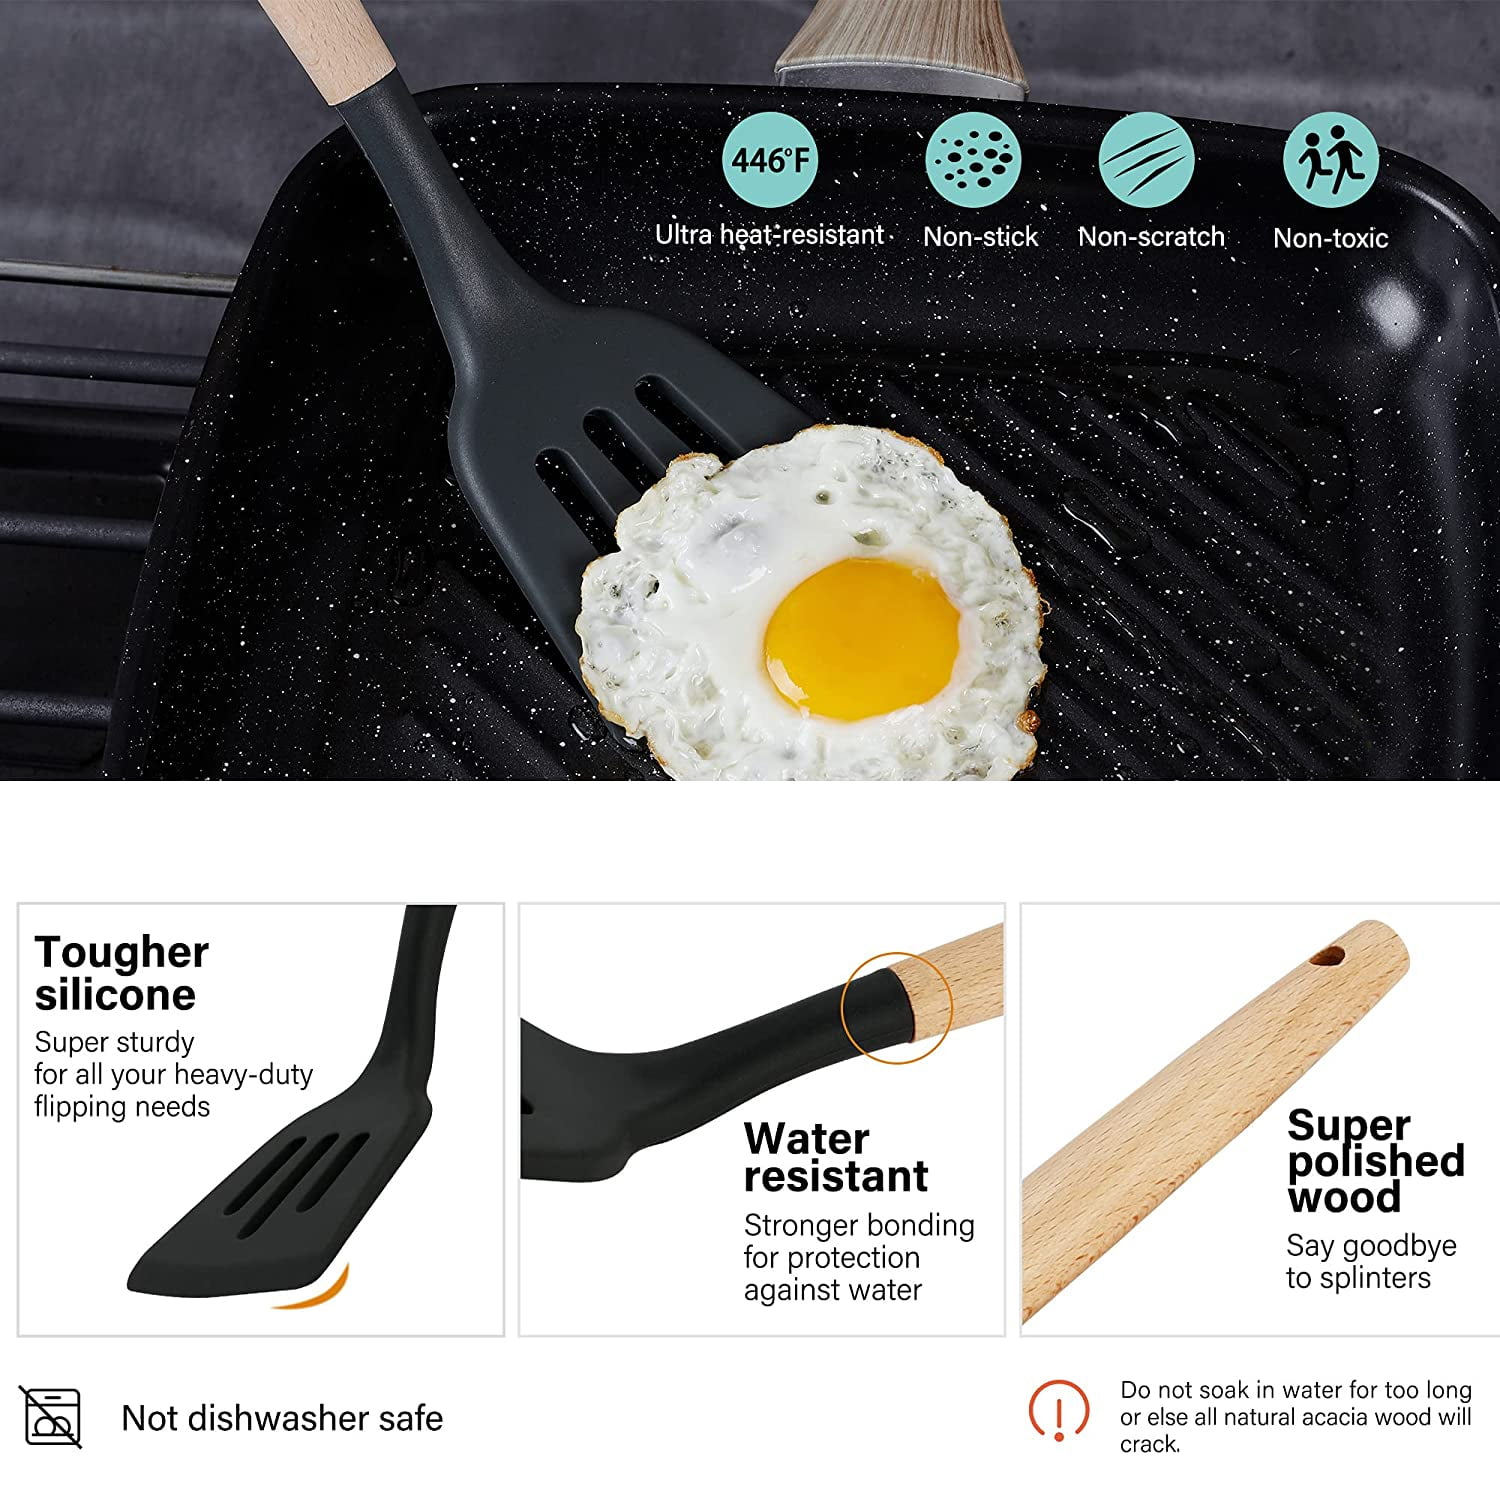 Silicone Kitchen Cooking Utensil Set, 9pcs Kitchen Utensils Spatula Set with Wooden Handle for Nonstick Cookware, 446°F Heat Resistant Silicone